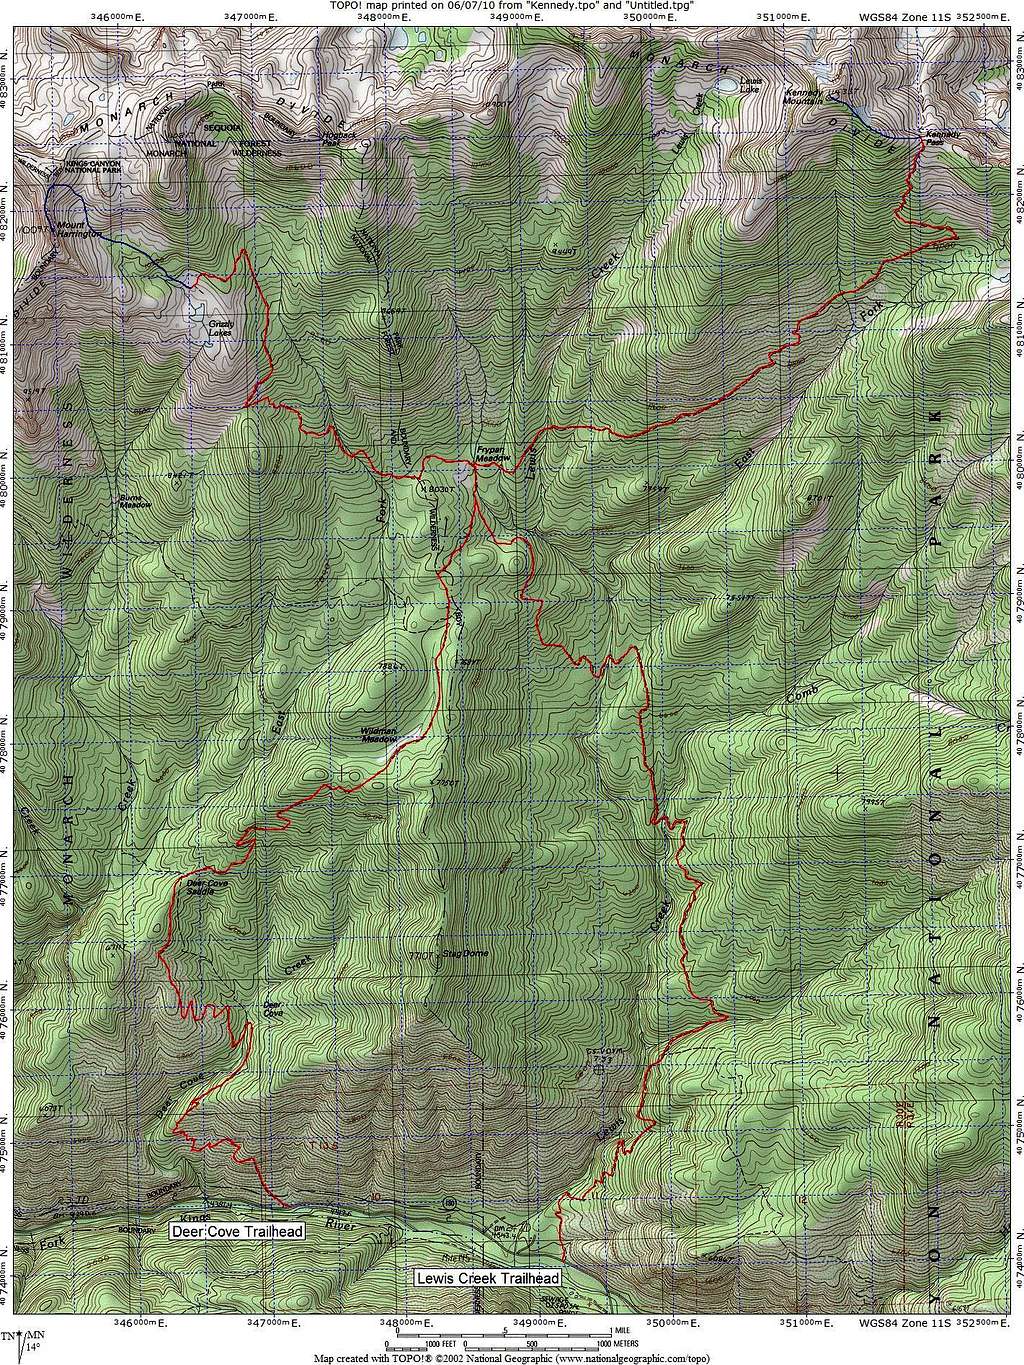 Route Map for Kennedy Mountain and Mount Harrington